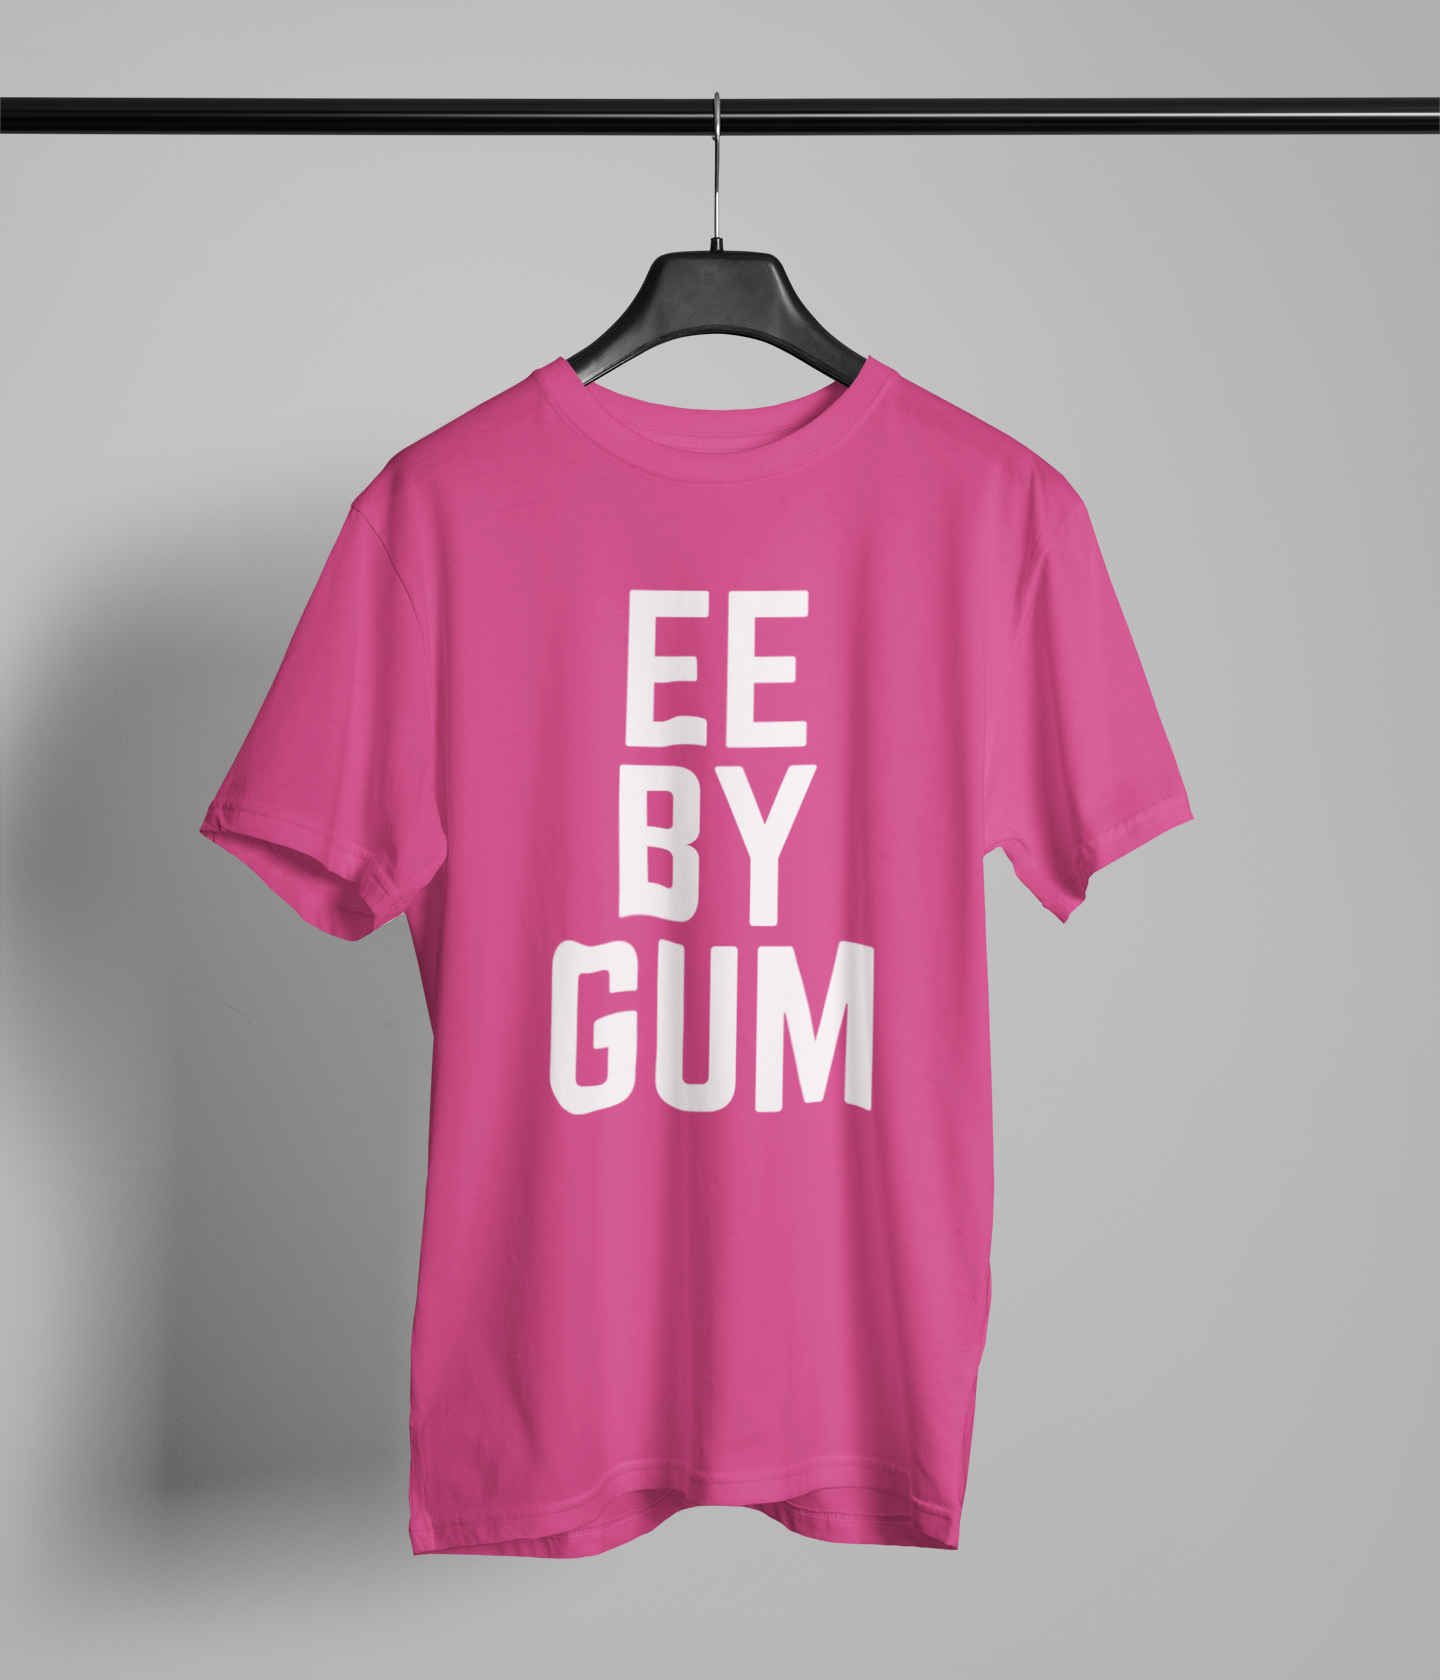 EE BY GUM Northern Slang T-Shirt